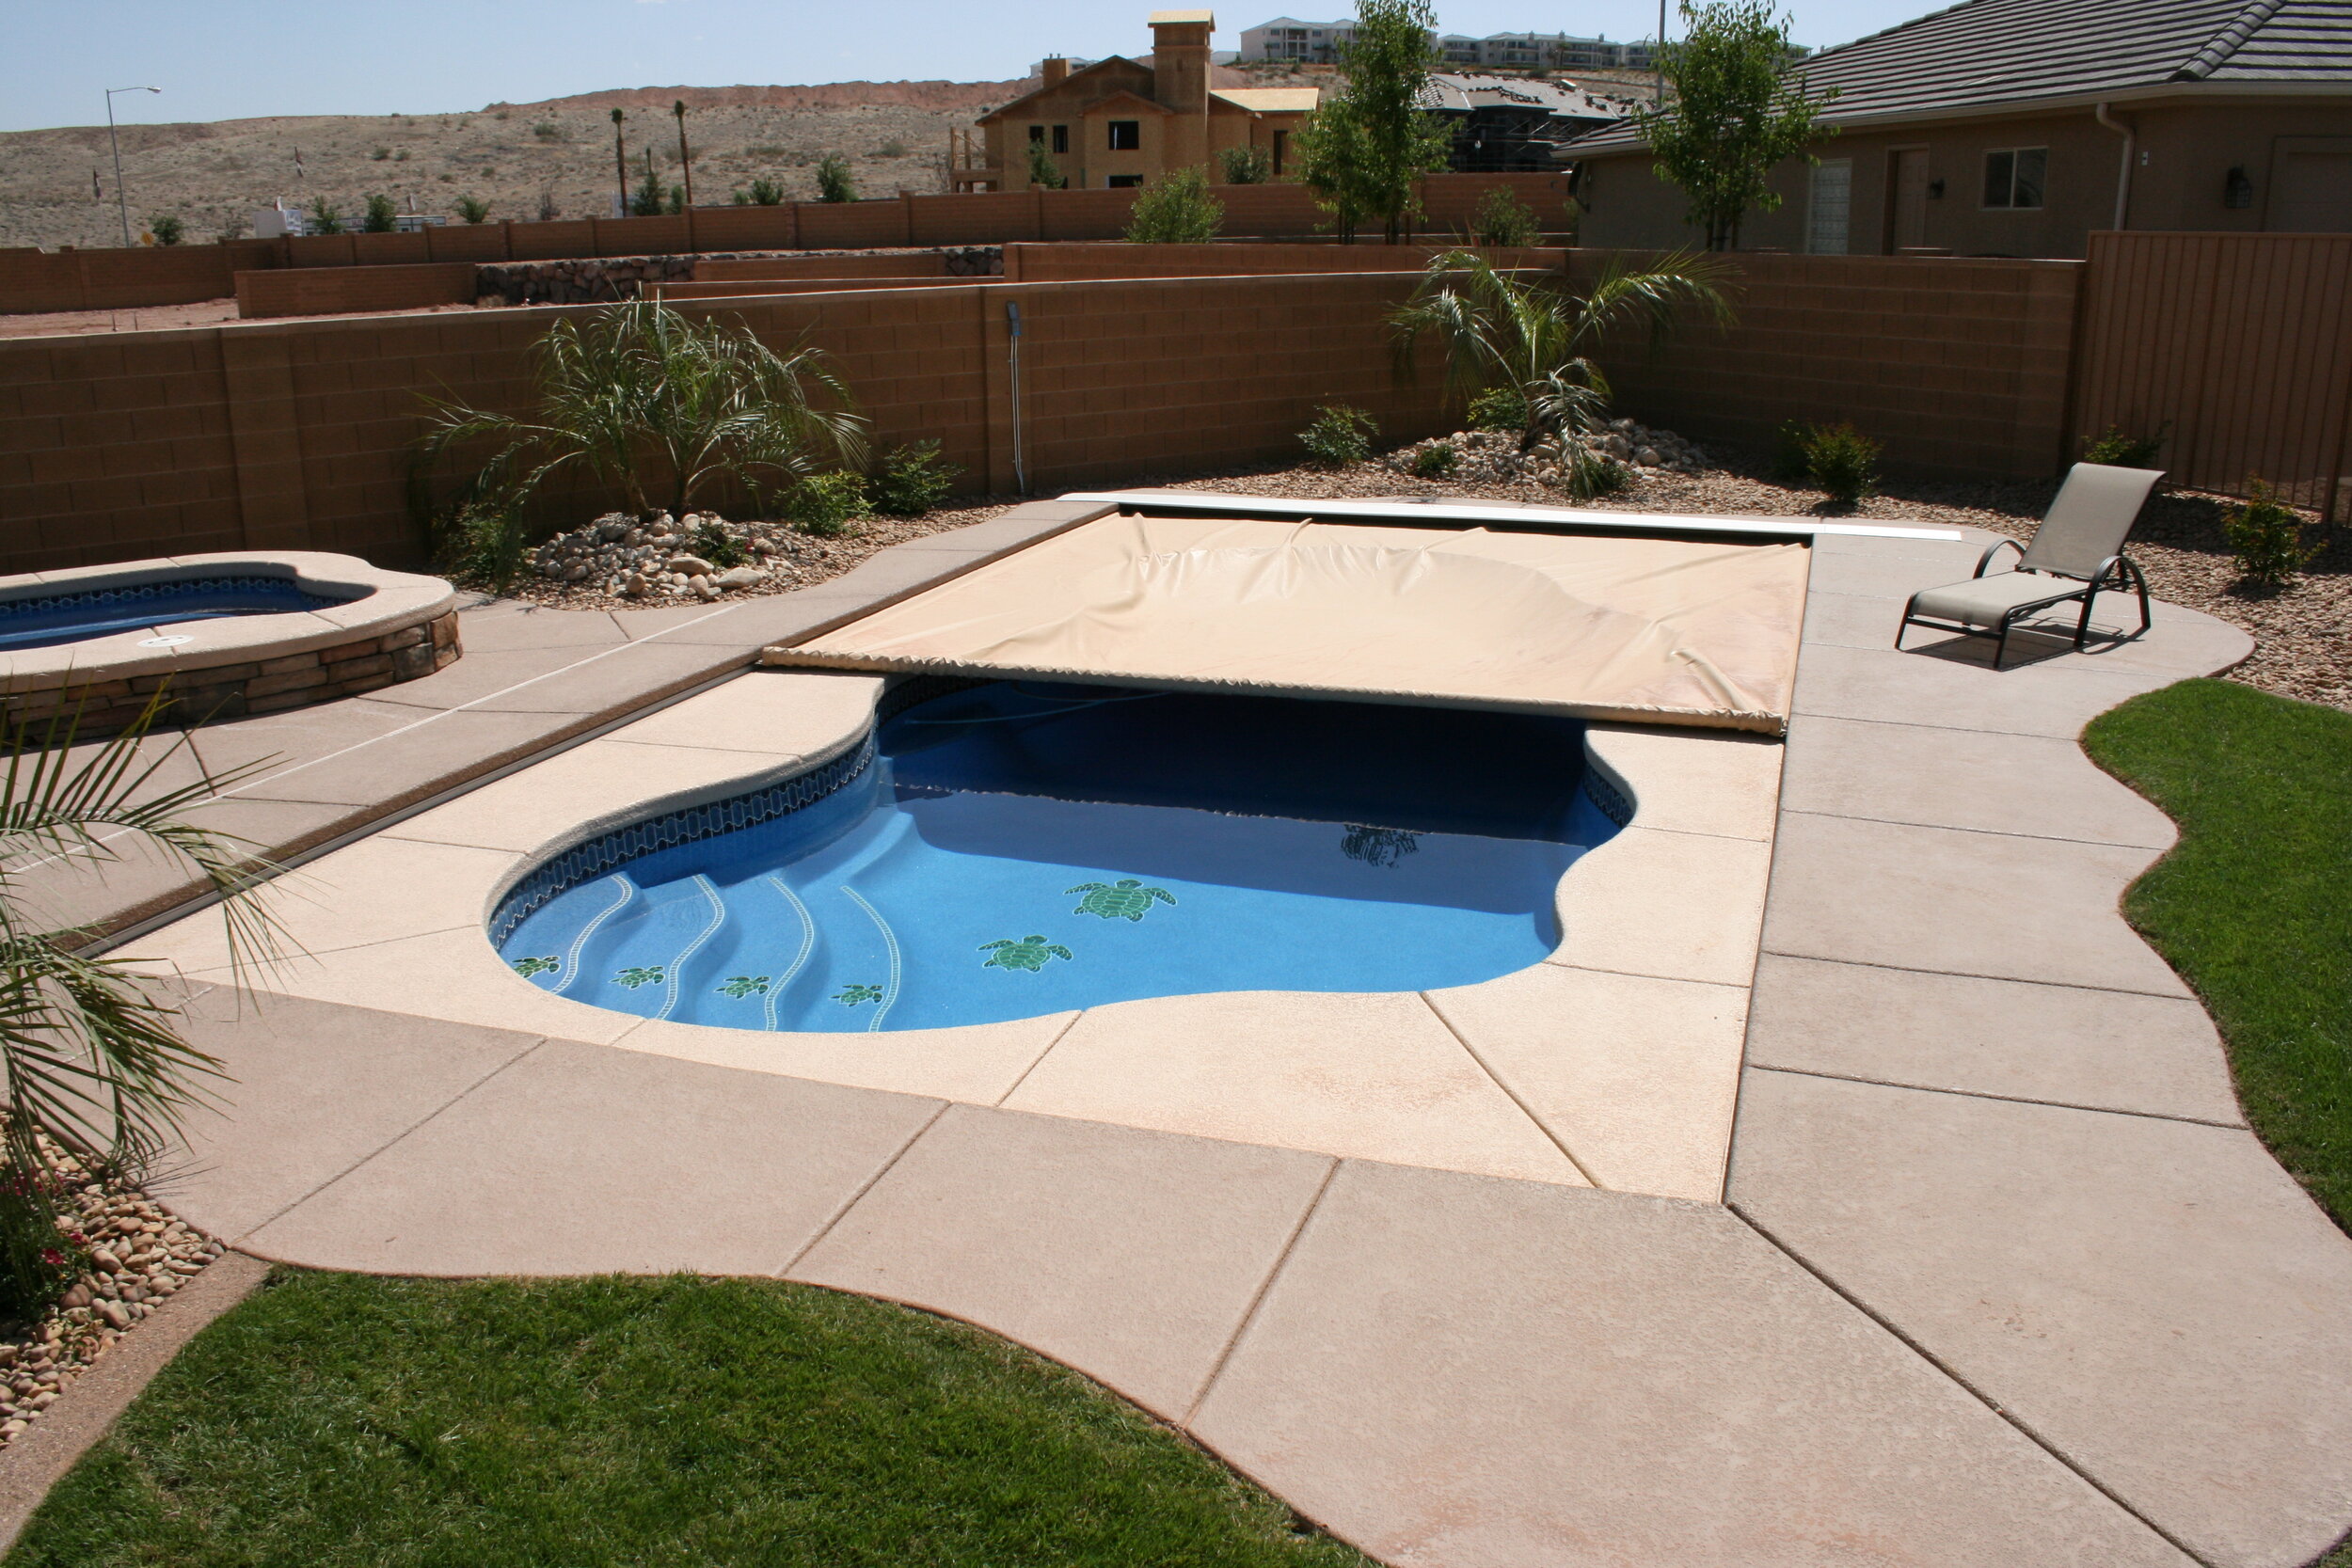 Automatic Safety Pool Cover - Winter Care